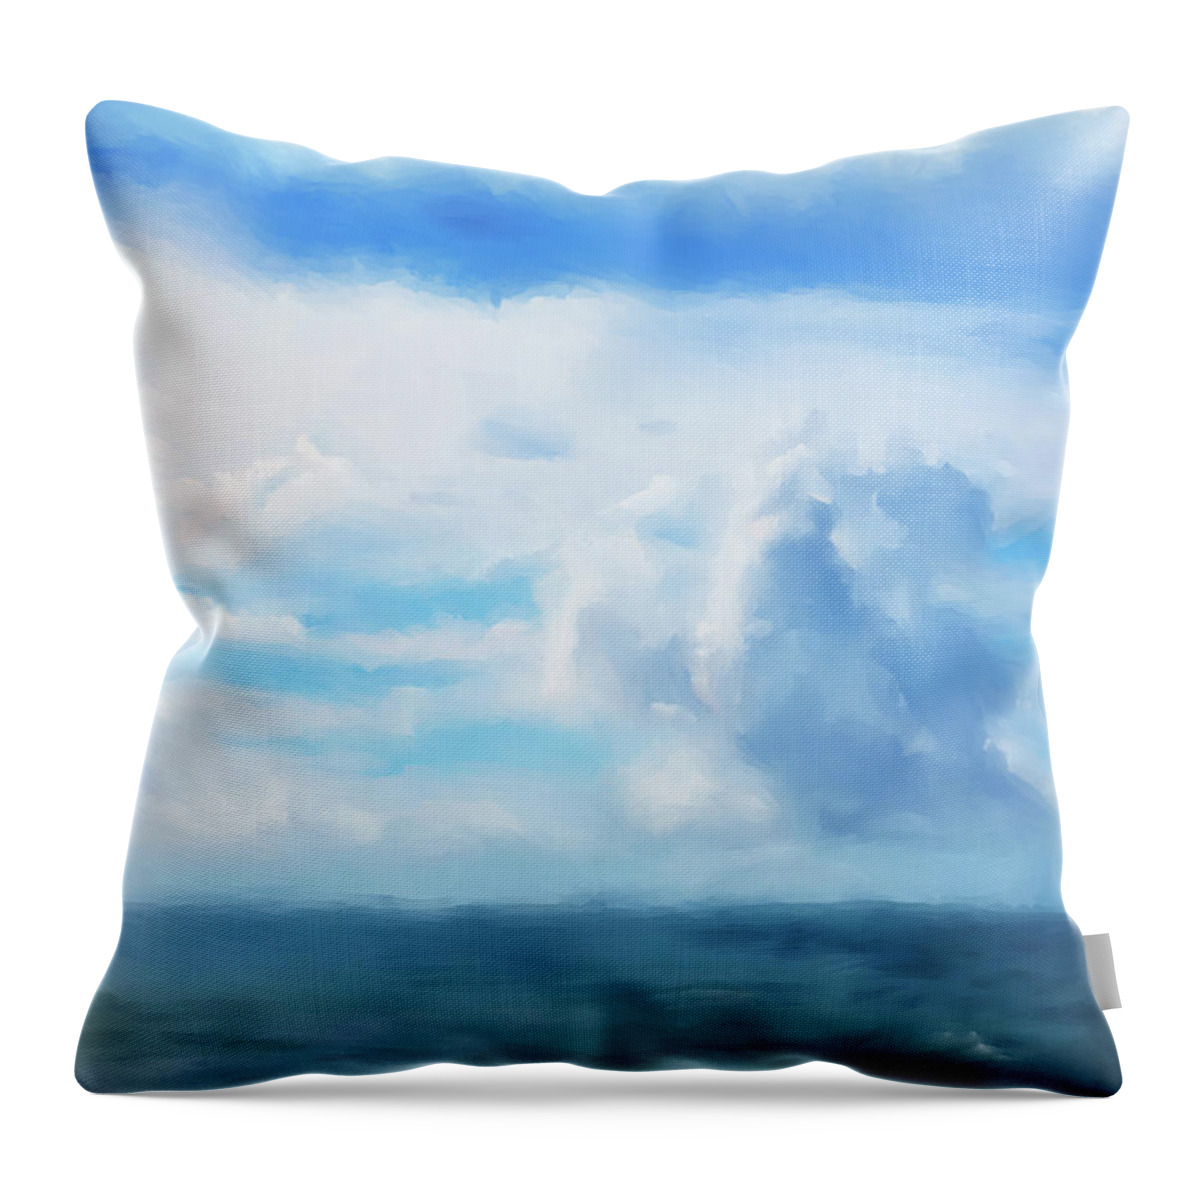 Seascape Throw Pillow featuring the digital art Morning on the OBX by Shawn Conn